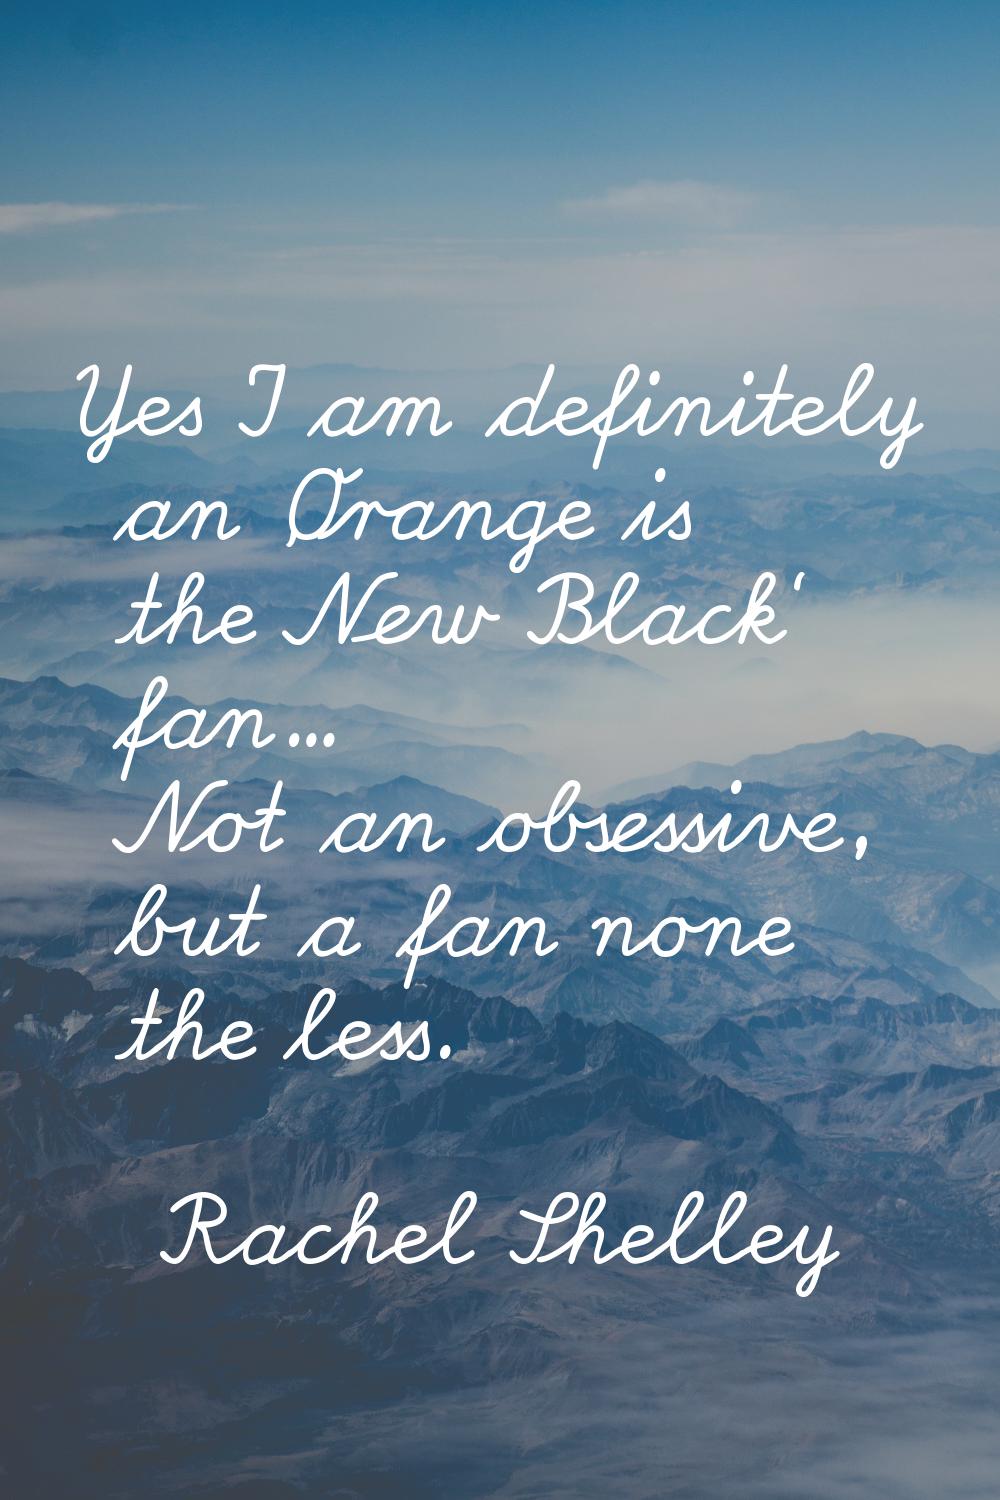 Yes I am definitely an 'Orange is the New Black' fan... Not an obsessive, but a fan none the less.